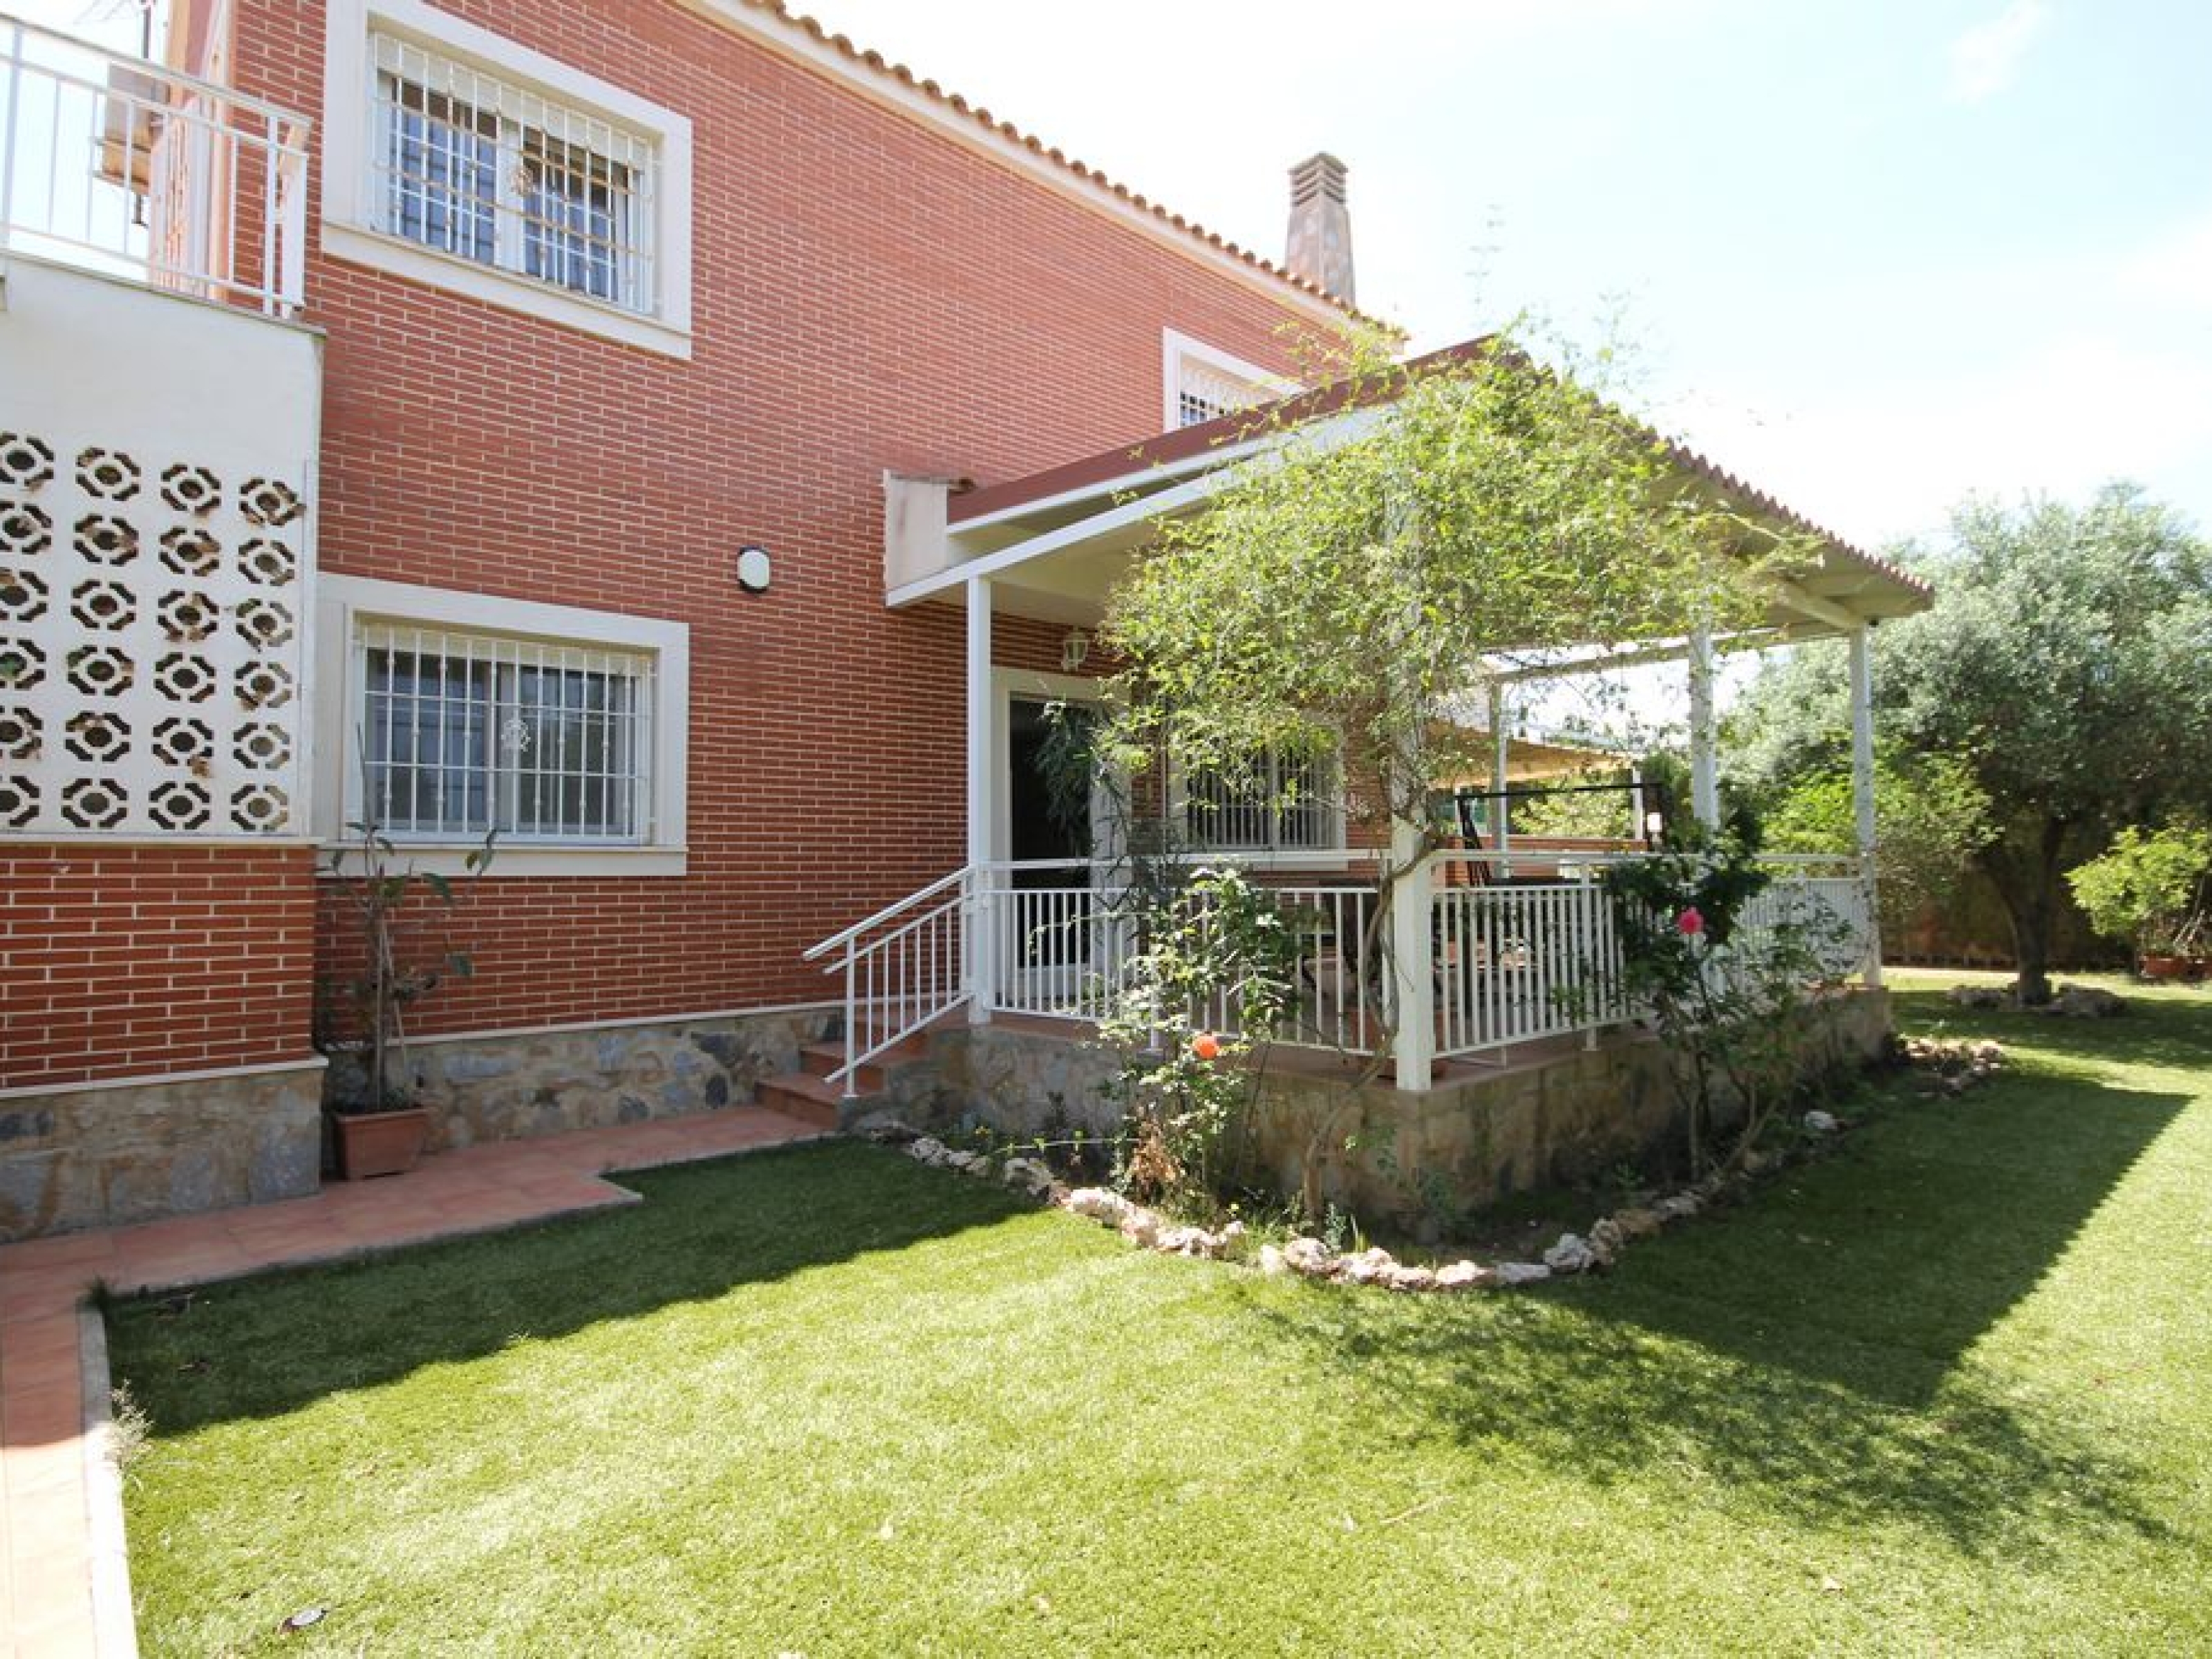 Semi detached villa with large garage and room for a pool